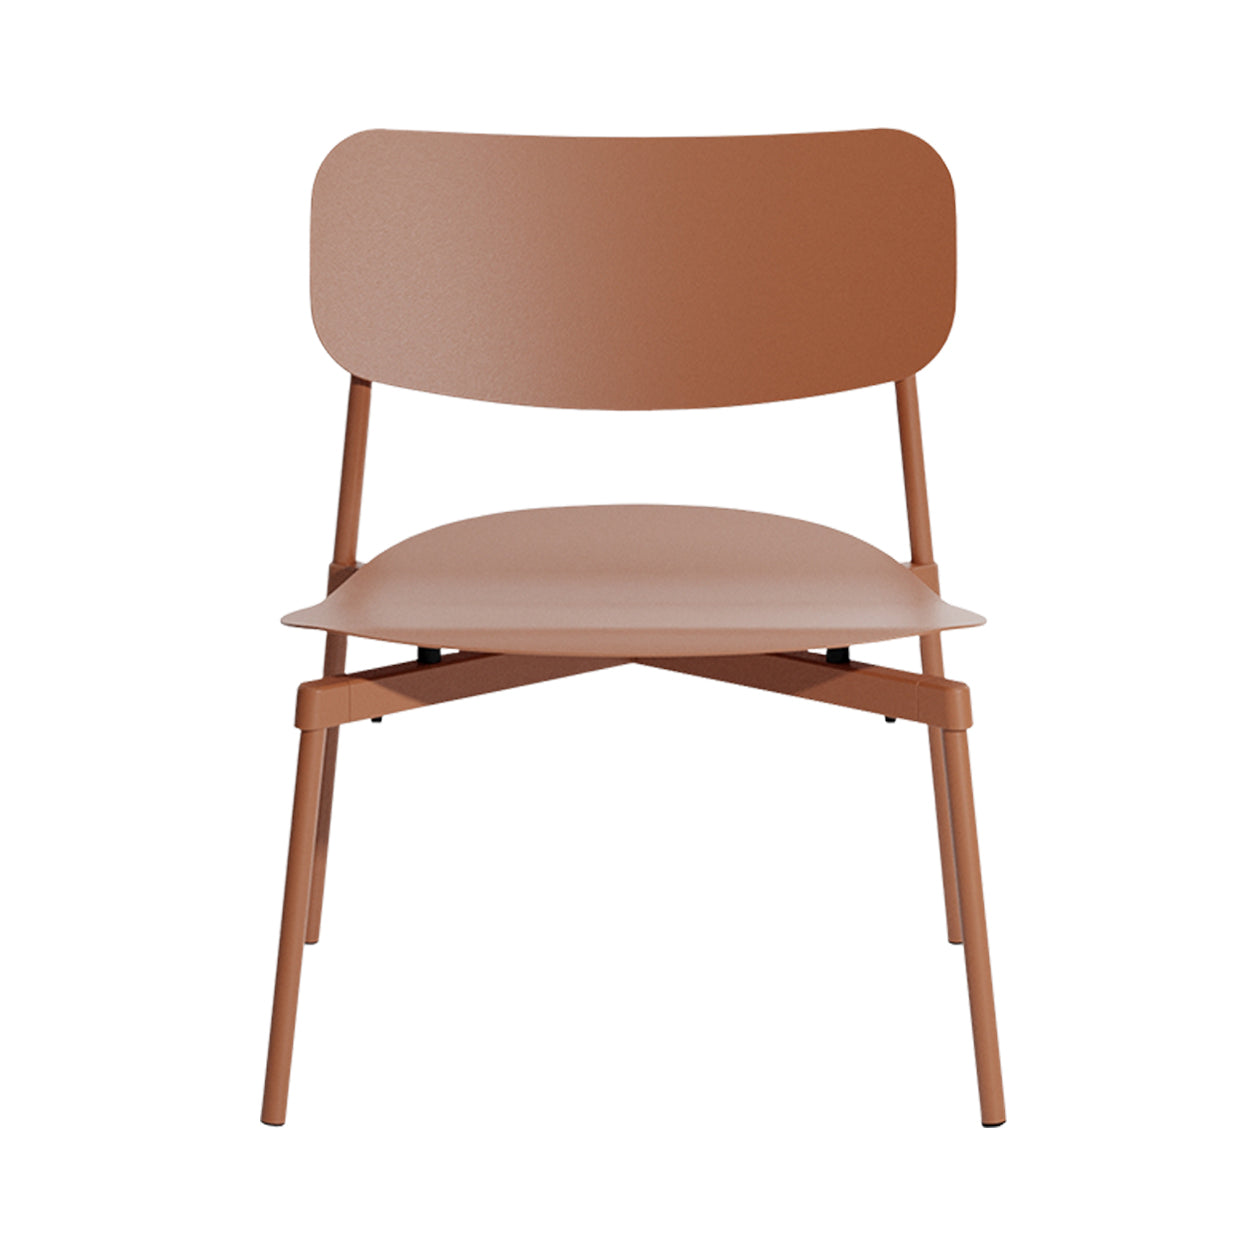 Fromme Stacking Lounge Chair: Terracotta